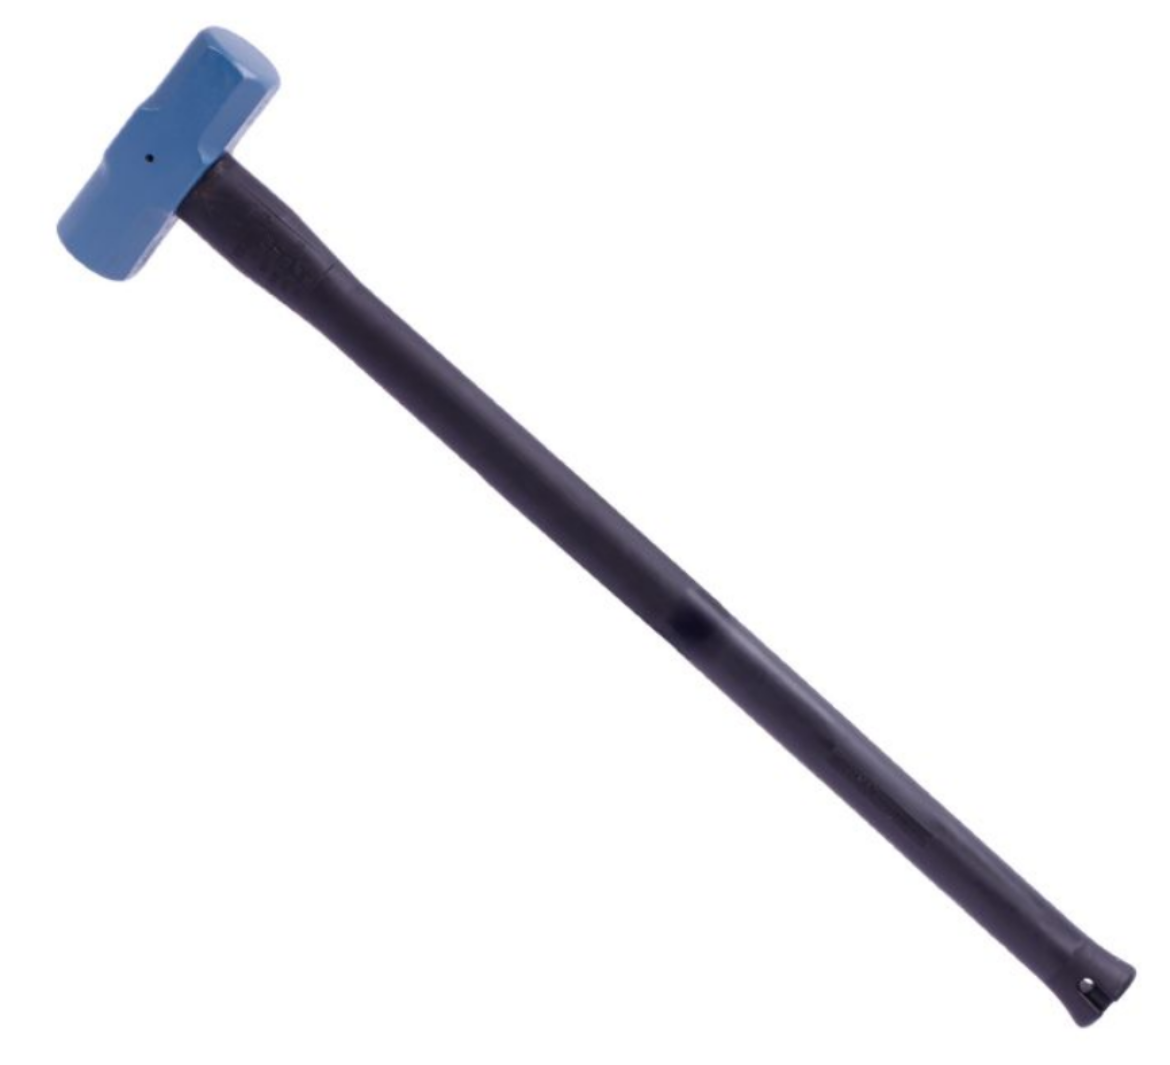 Picture of Sledge Hammer 14lb/6.35kg Normalised (soft face), Pinned Steel Core Fibreglass Handle 900mm